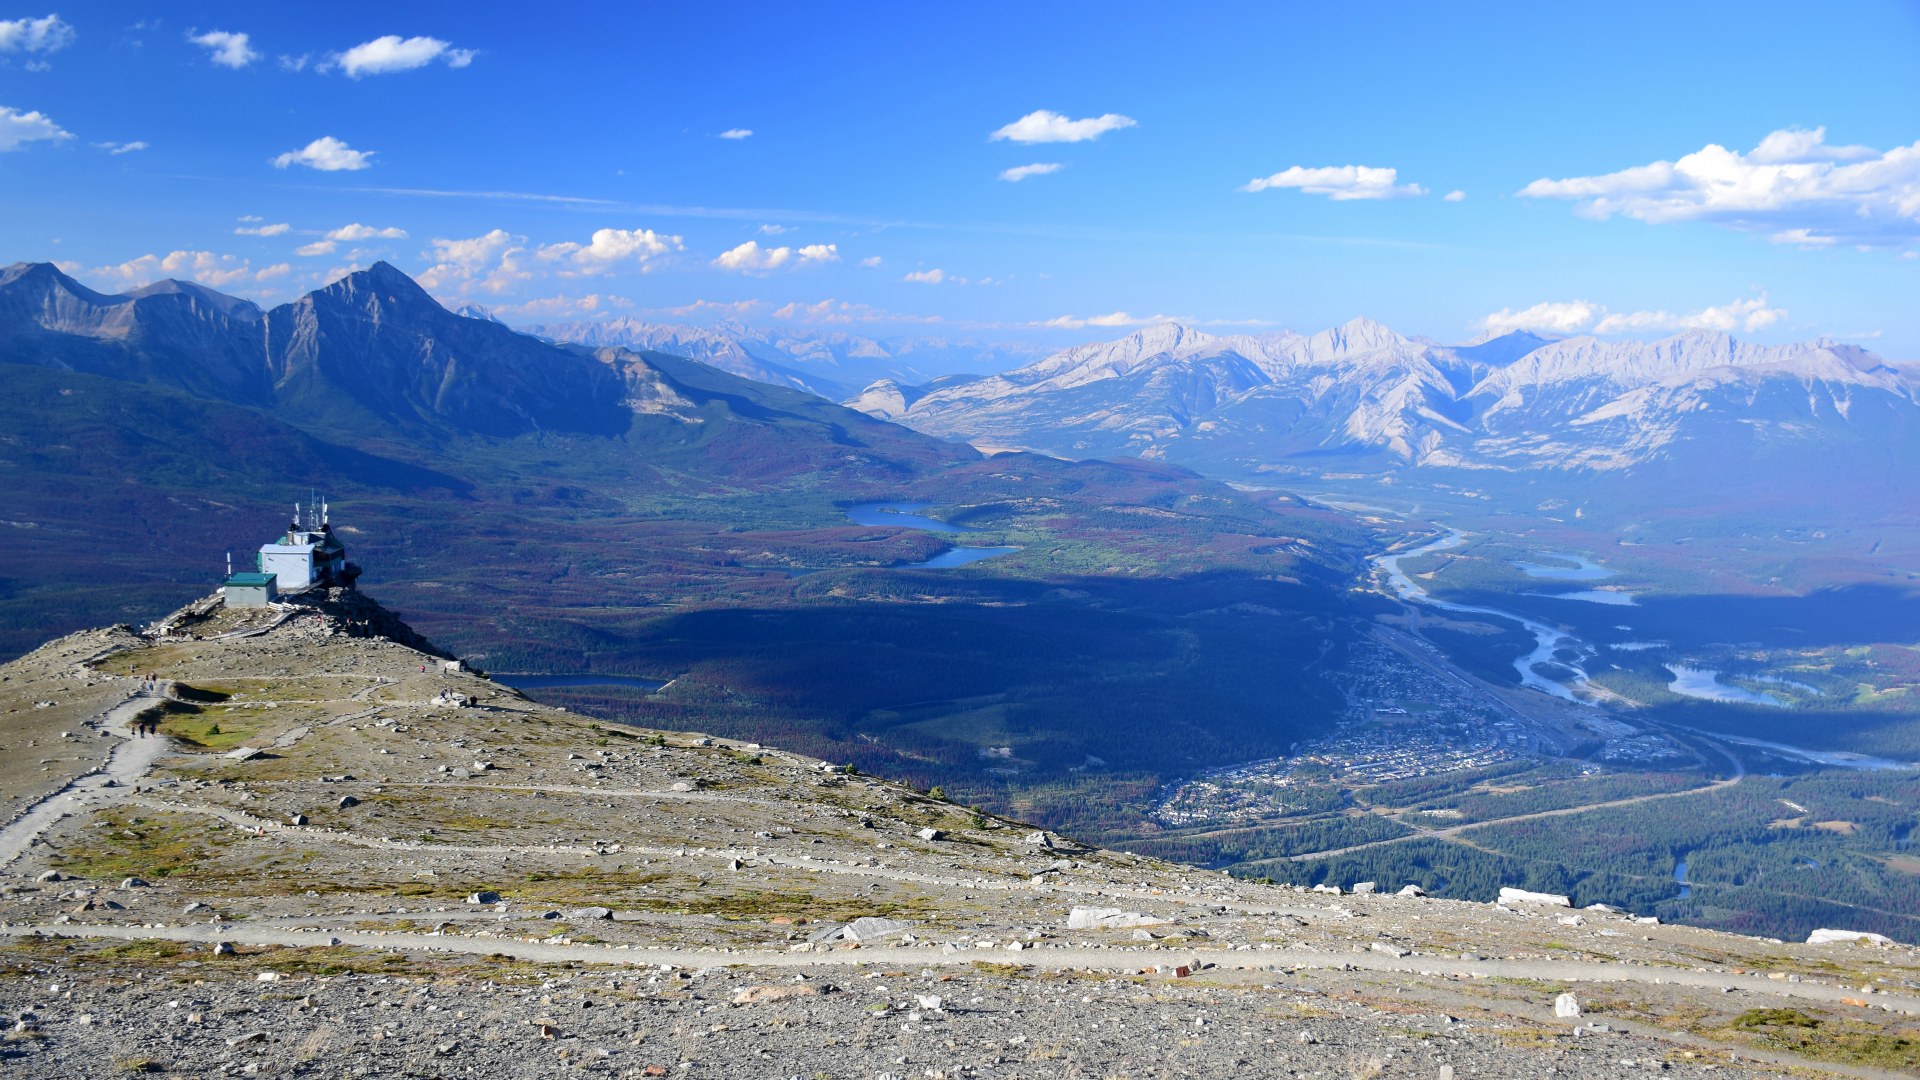 View from path to Whistler Summit, Jasper National Park